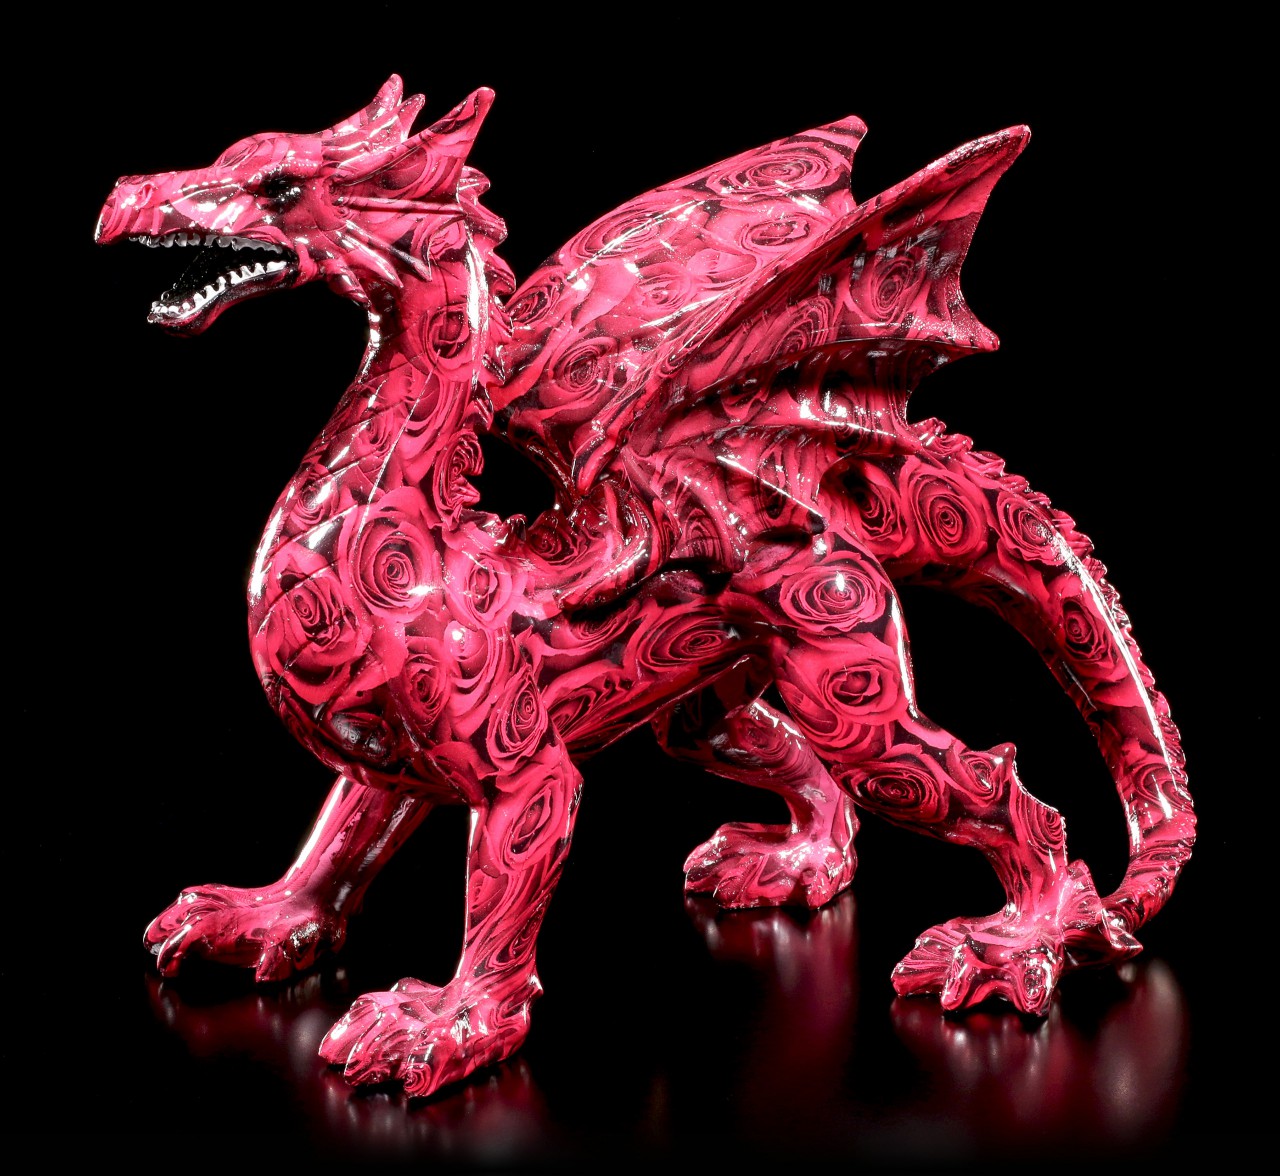 Colourful Dragon Figure with Roses - Romance Dragon